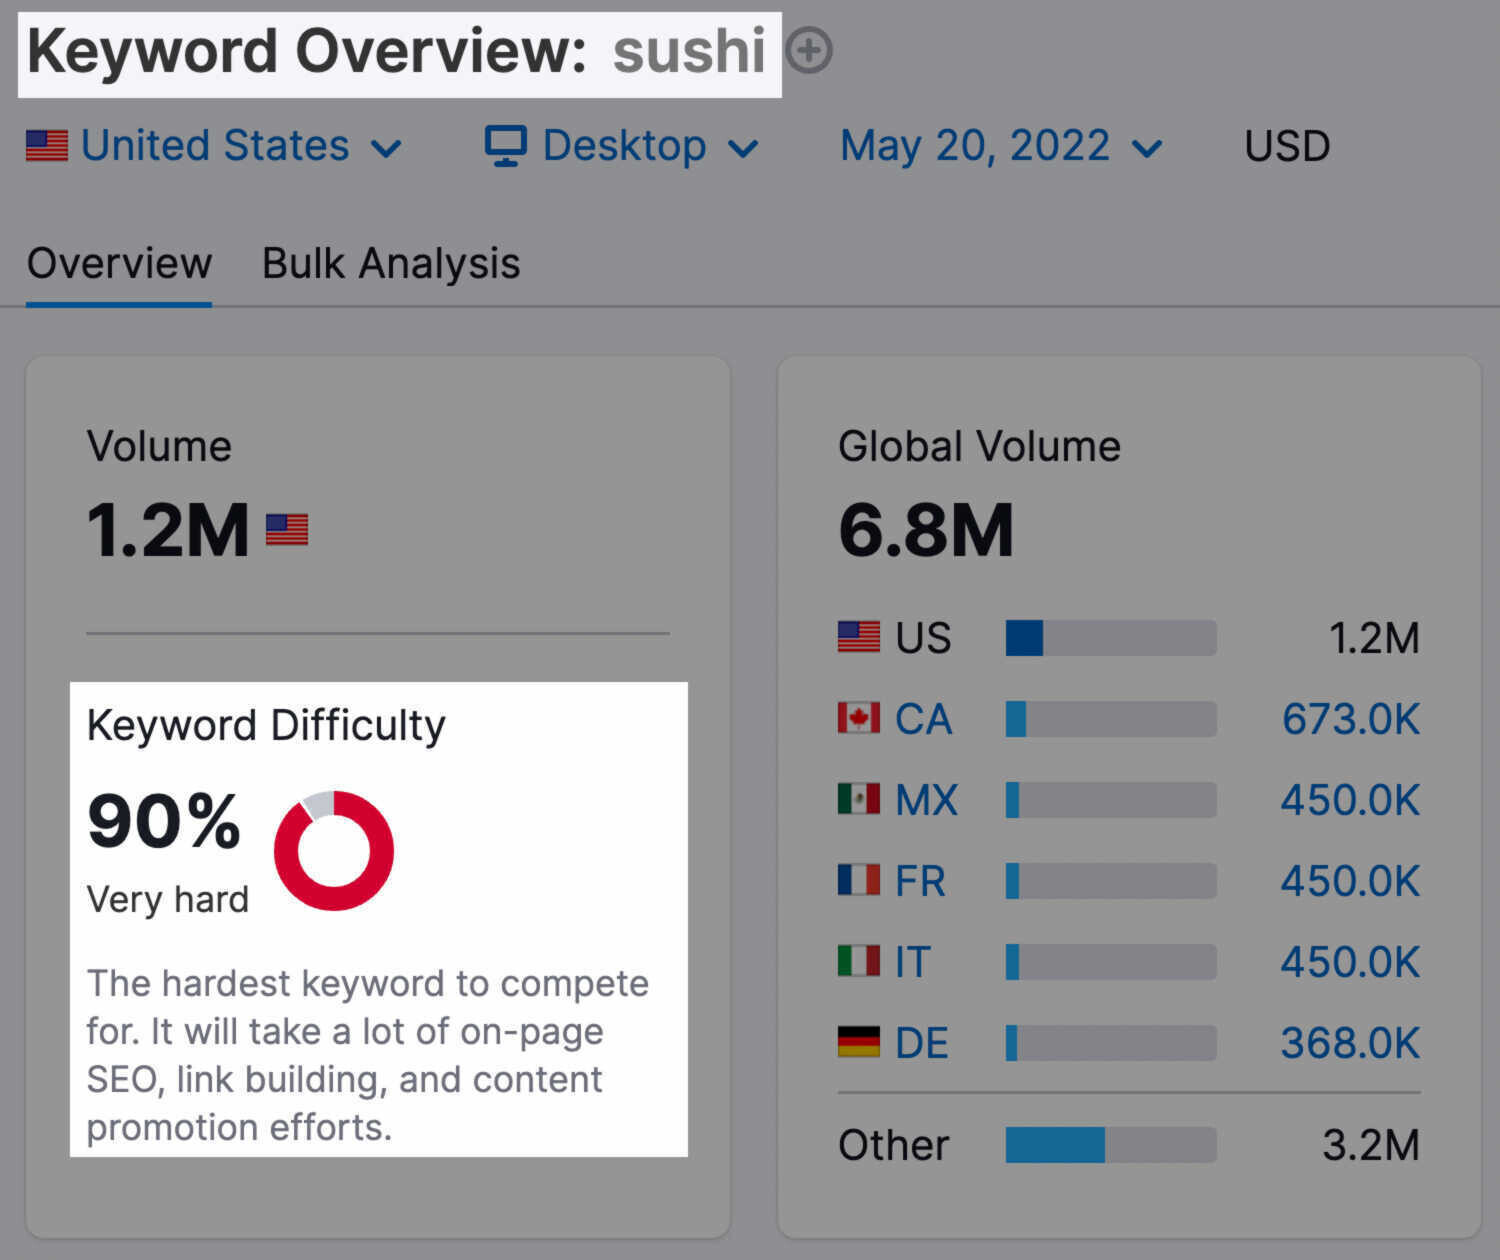 Keyword Overview for "sushi"